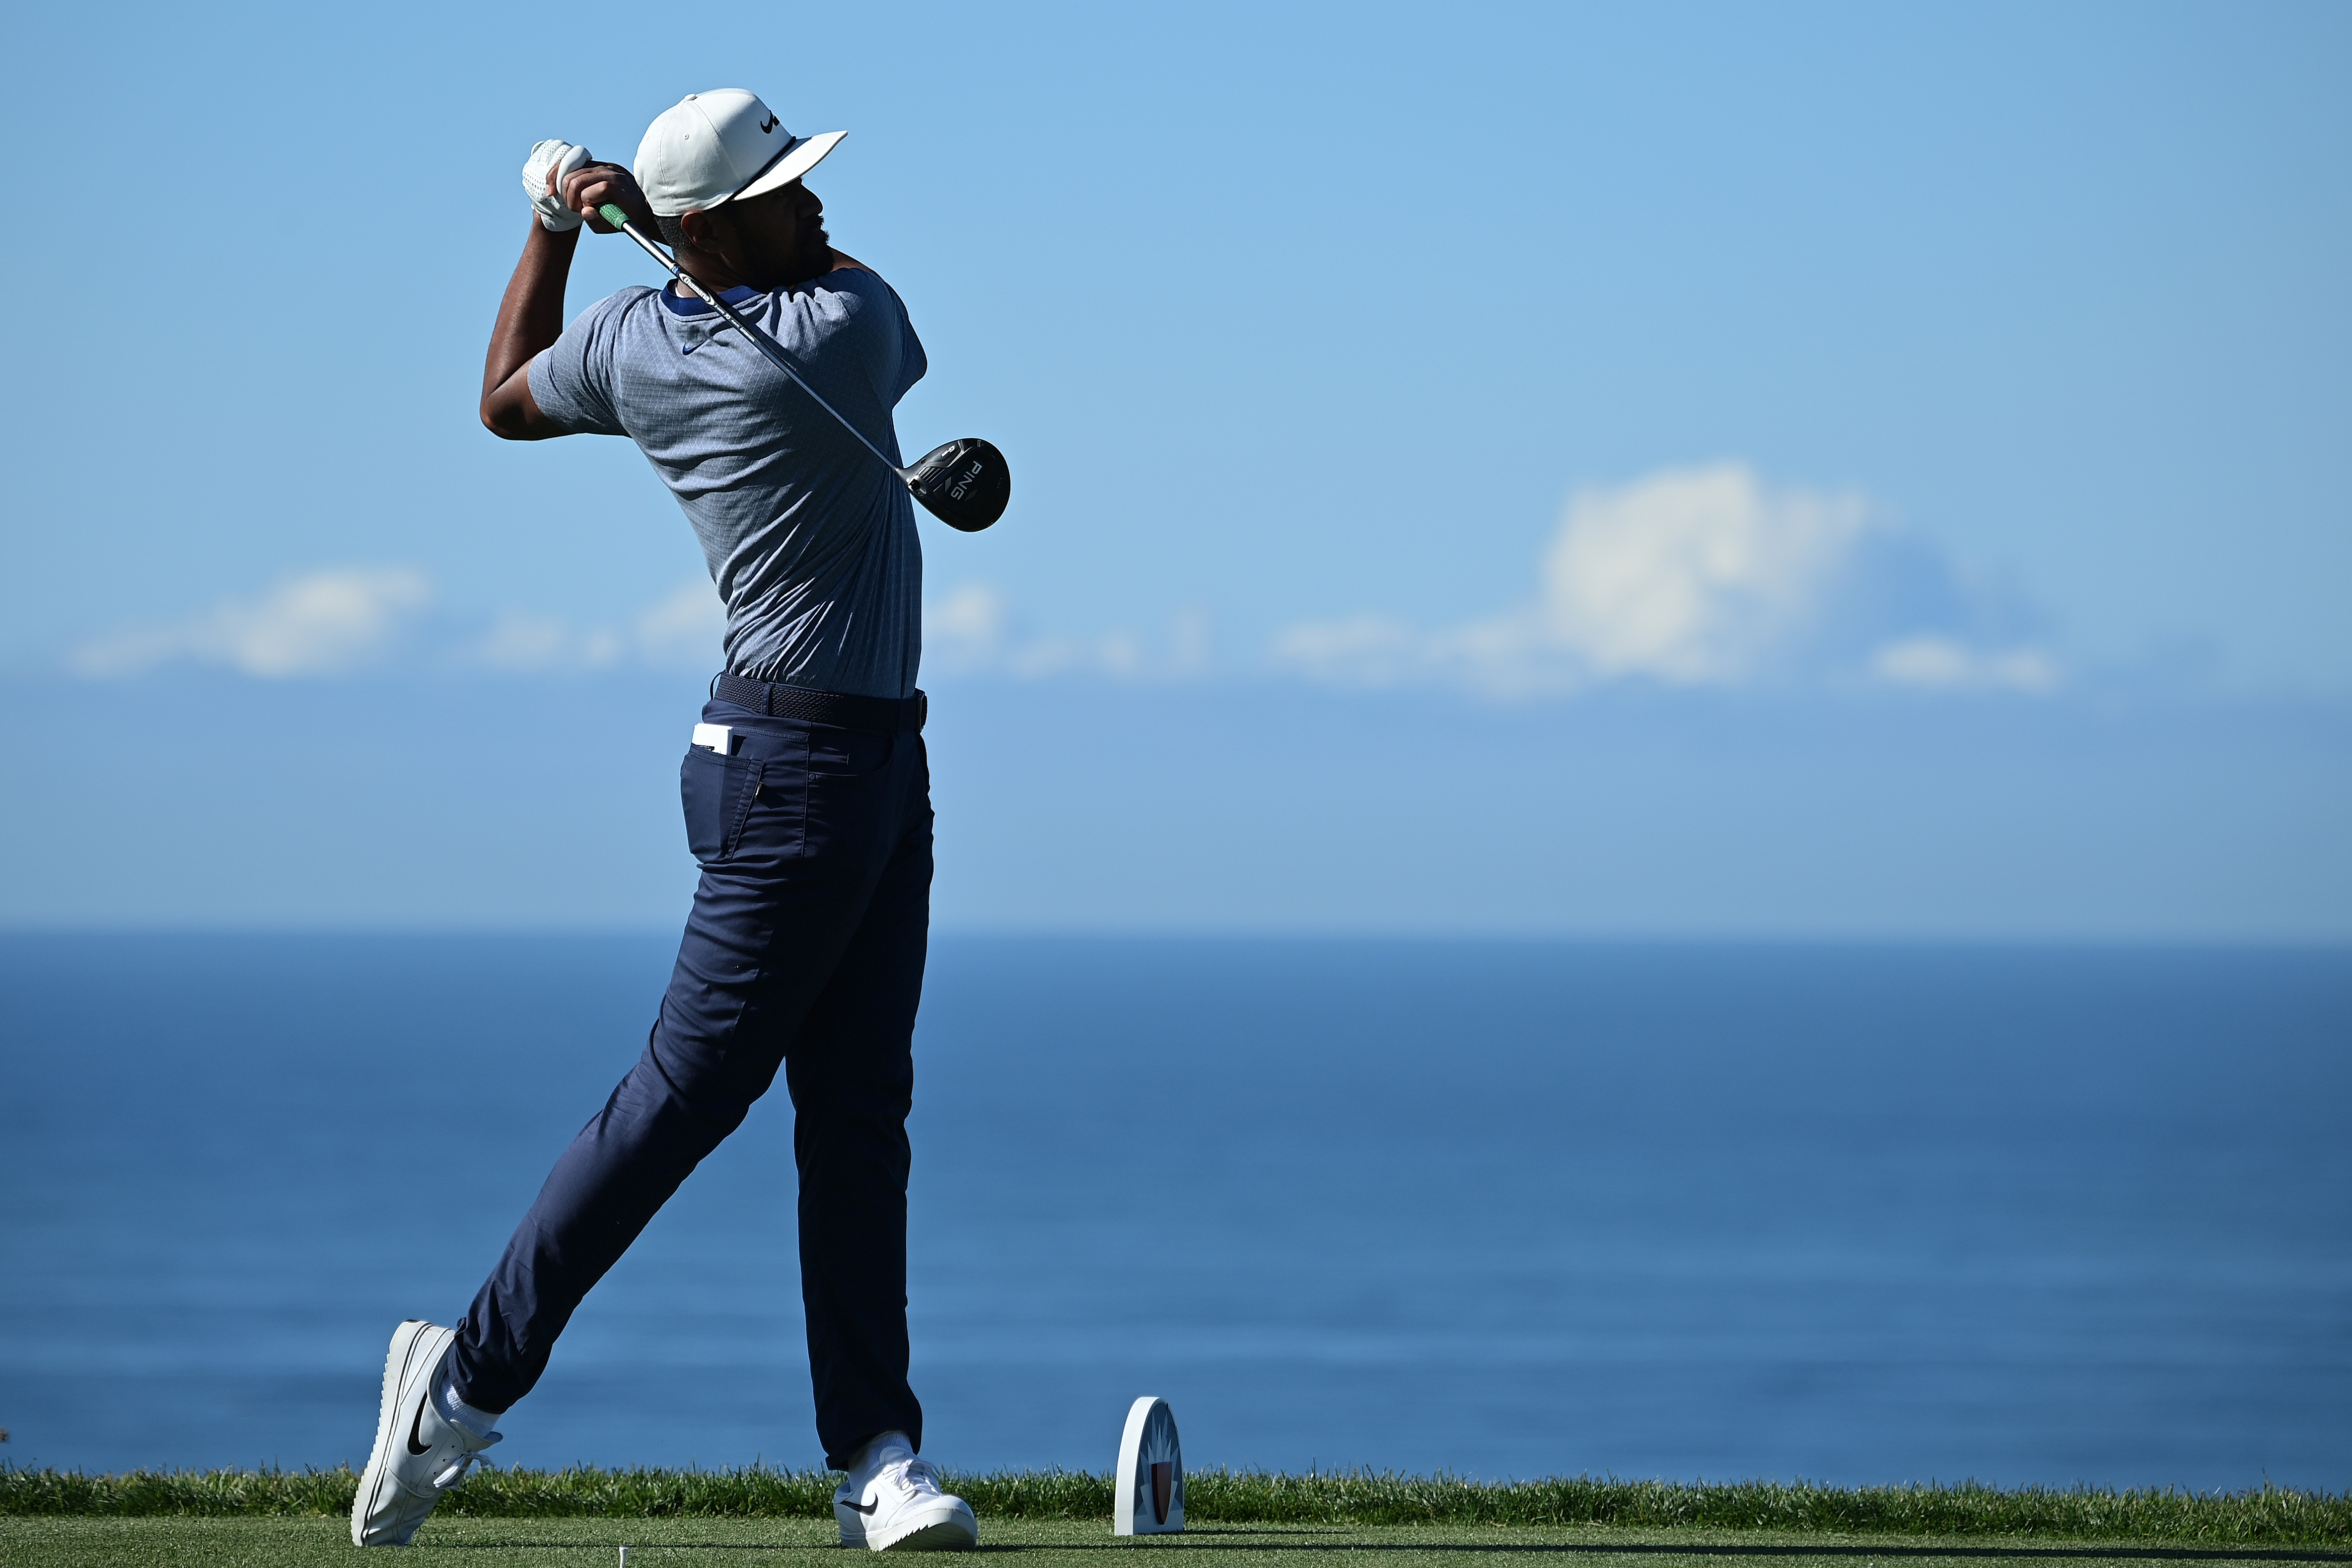 We should have our own rulebook on the PGA Tour” – Tony Finau